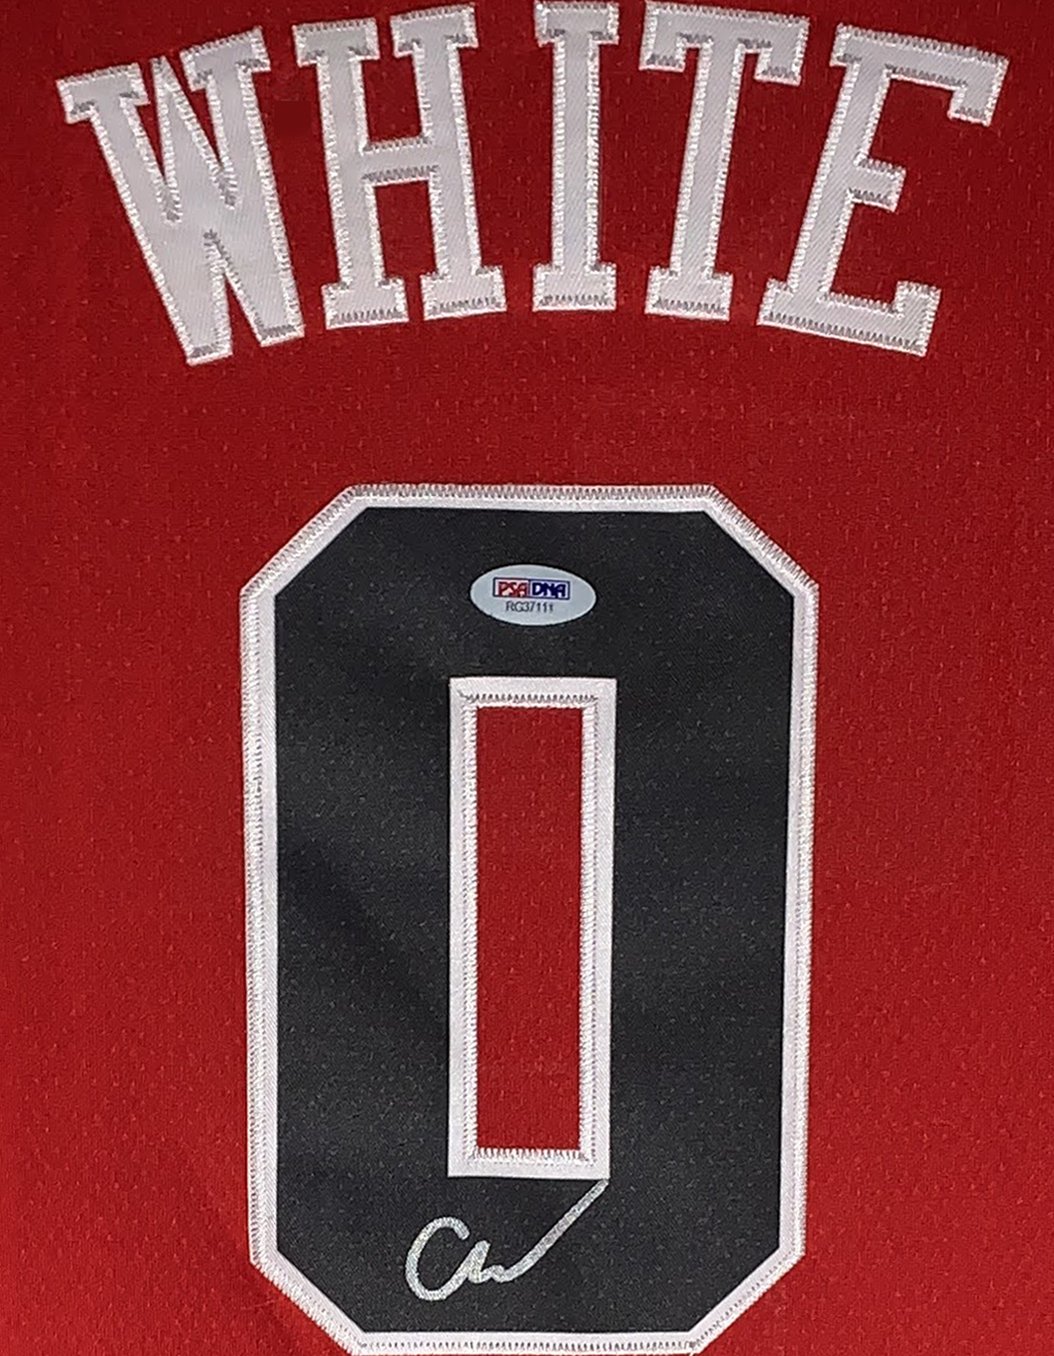 Coby White Bulls Jersey - Coby White Chicago Bulls Jersey - bulls authentic  jersey 